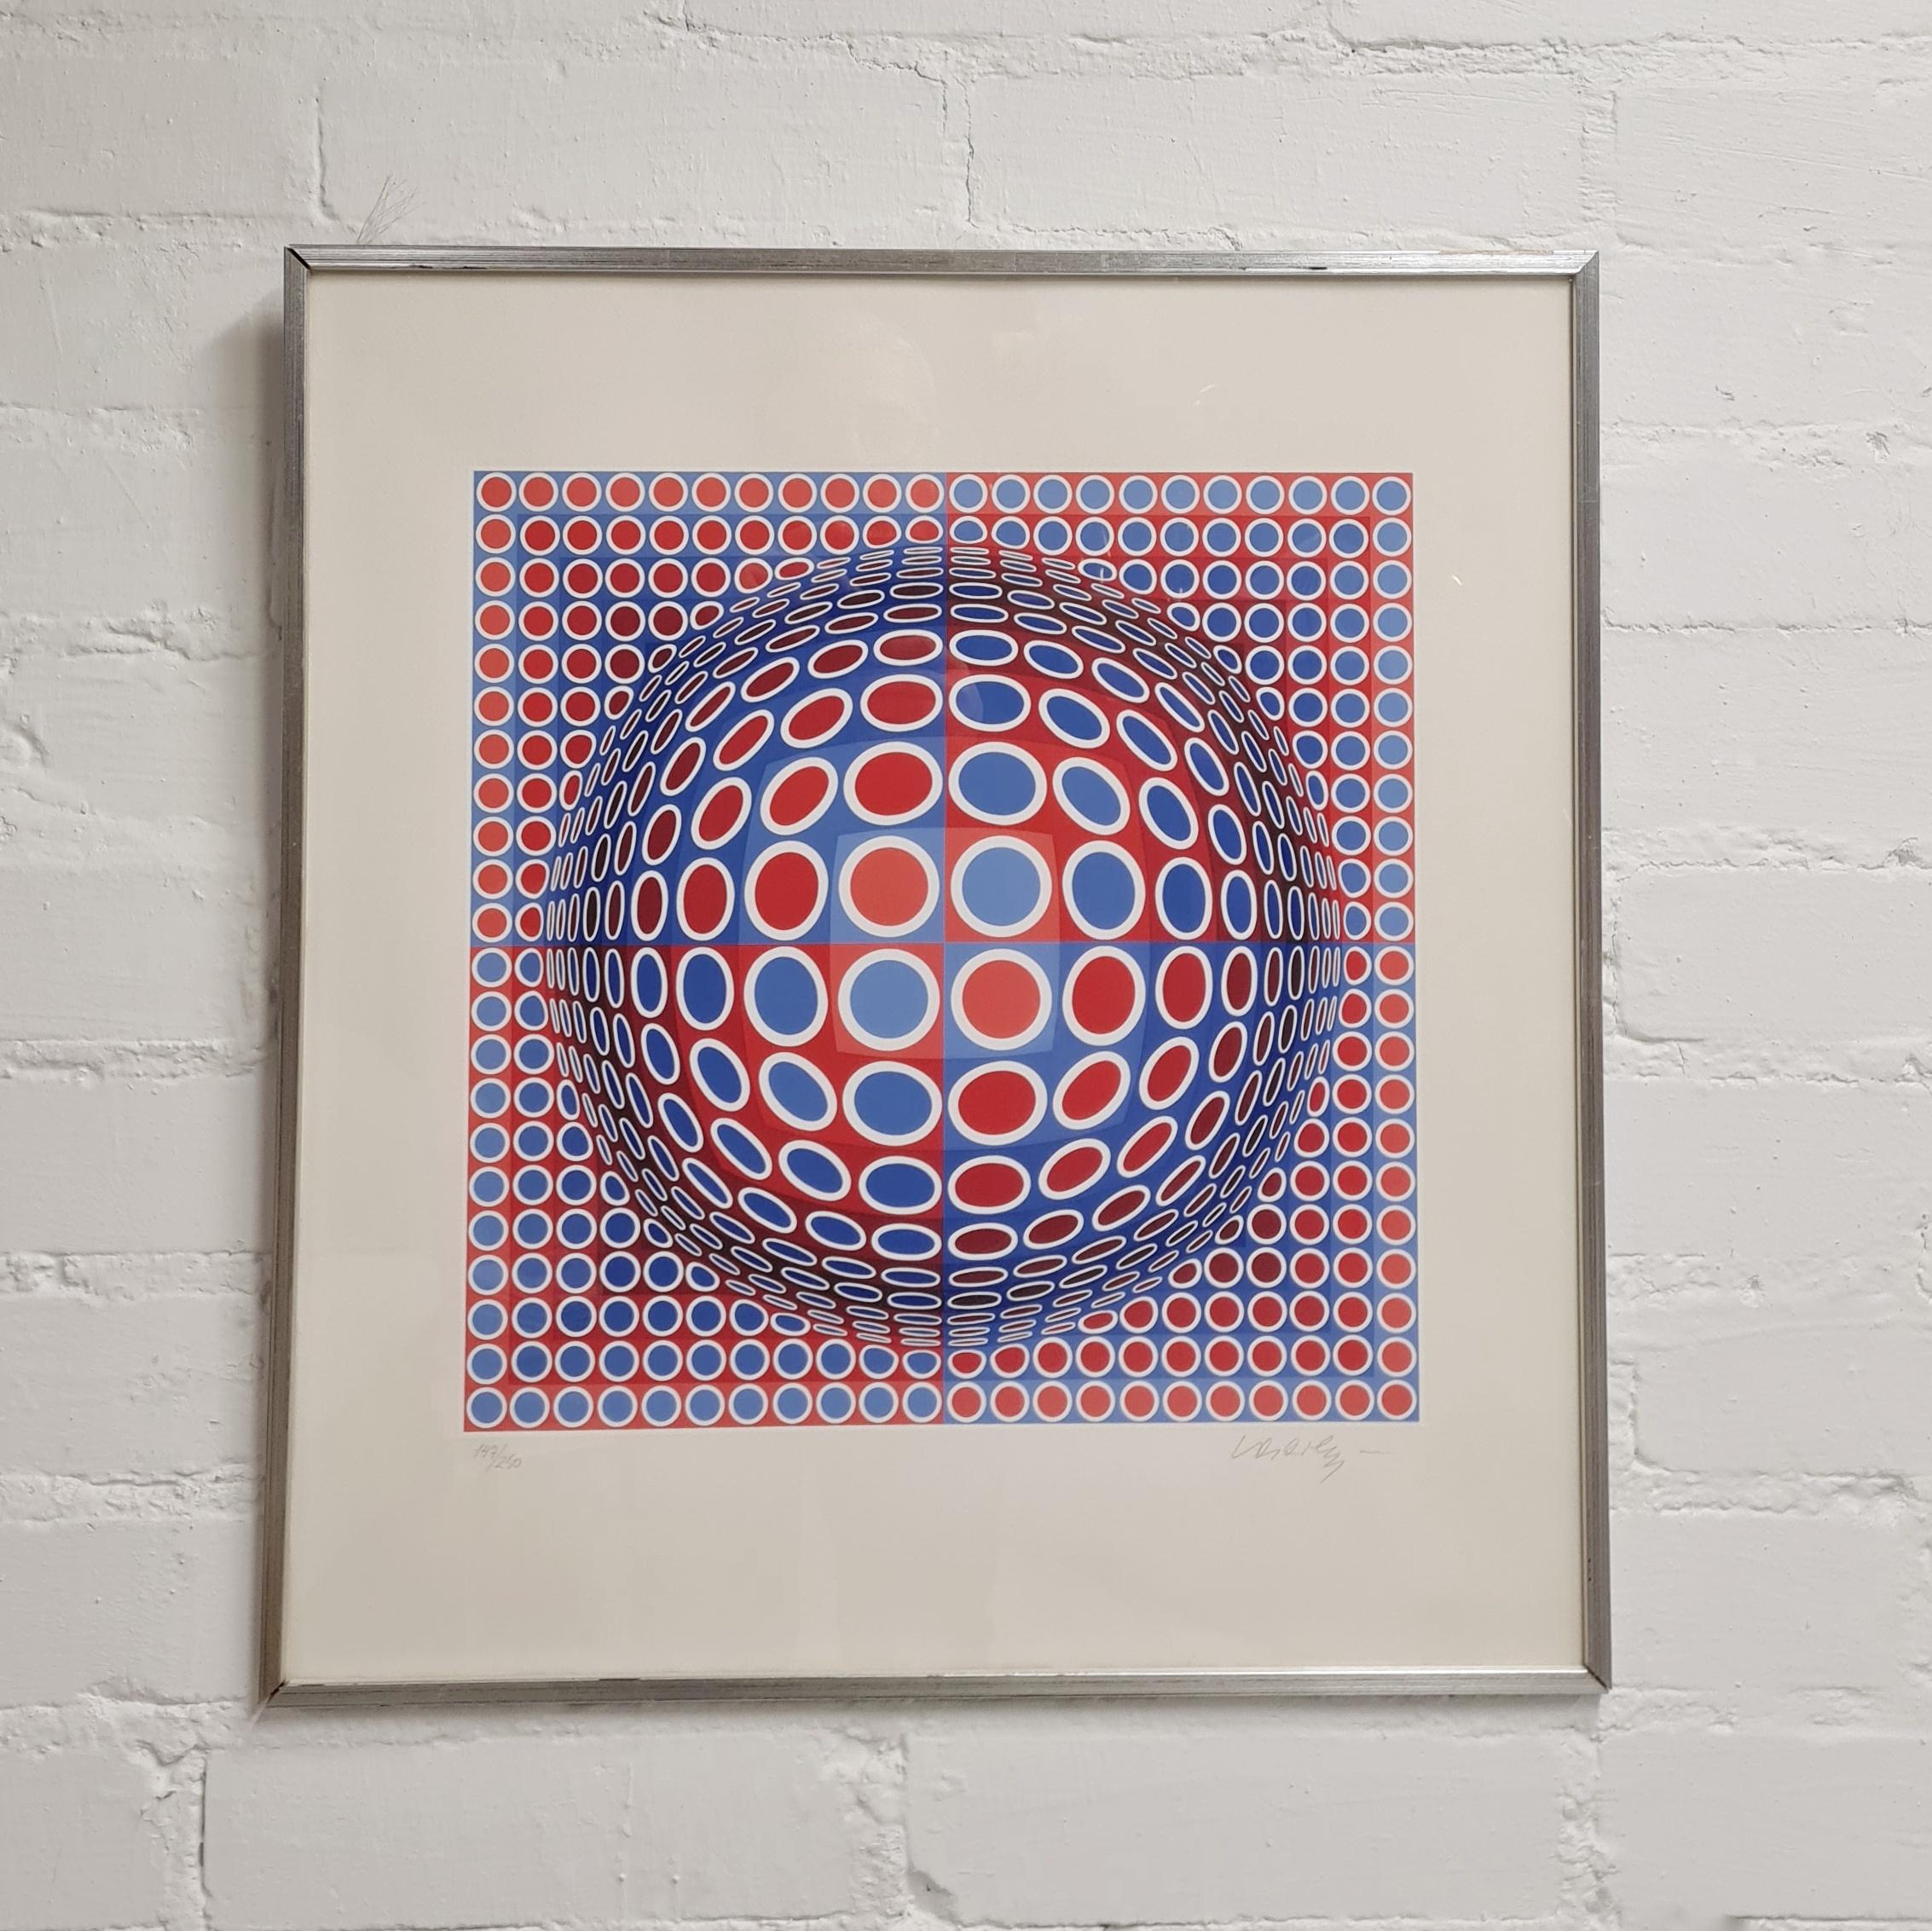 Wood Victor Vasarely Red and Blue Sphere, Signed Limited Edition